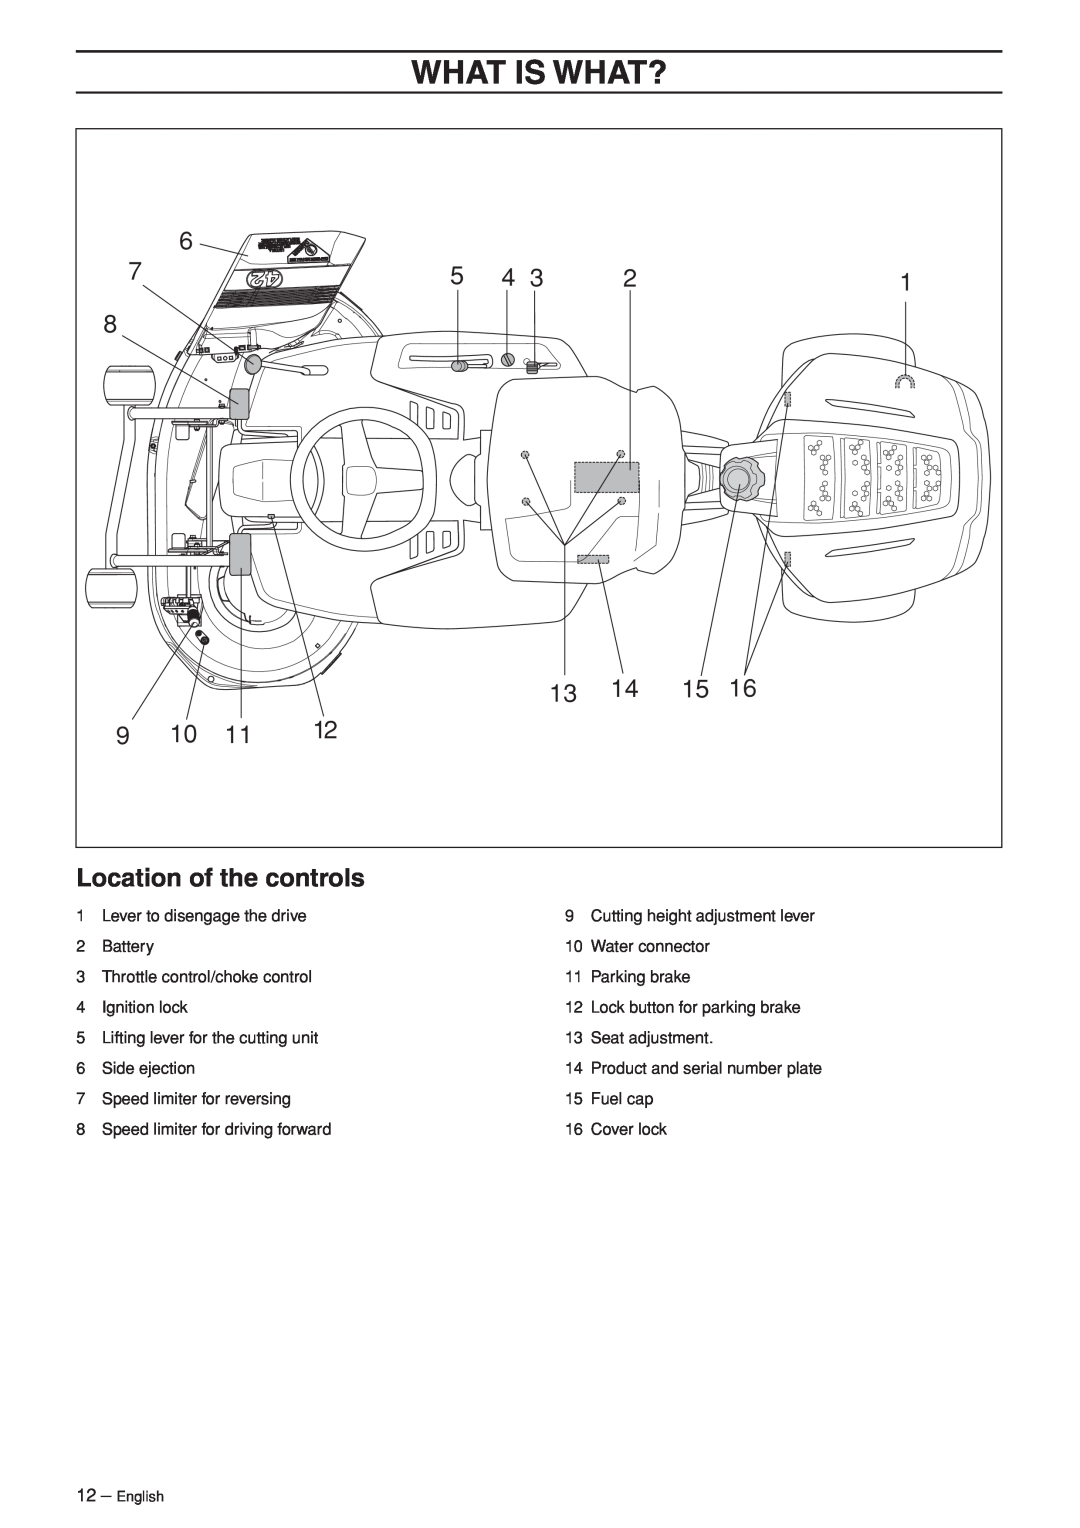 Husqvarna R120S manuel dutilisation What Is What?, Location of the controls 